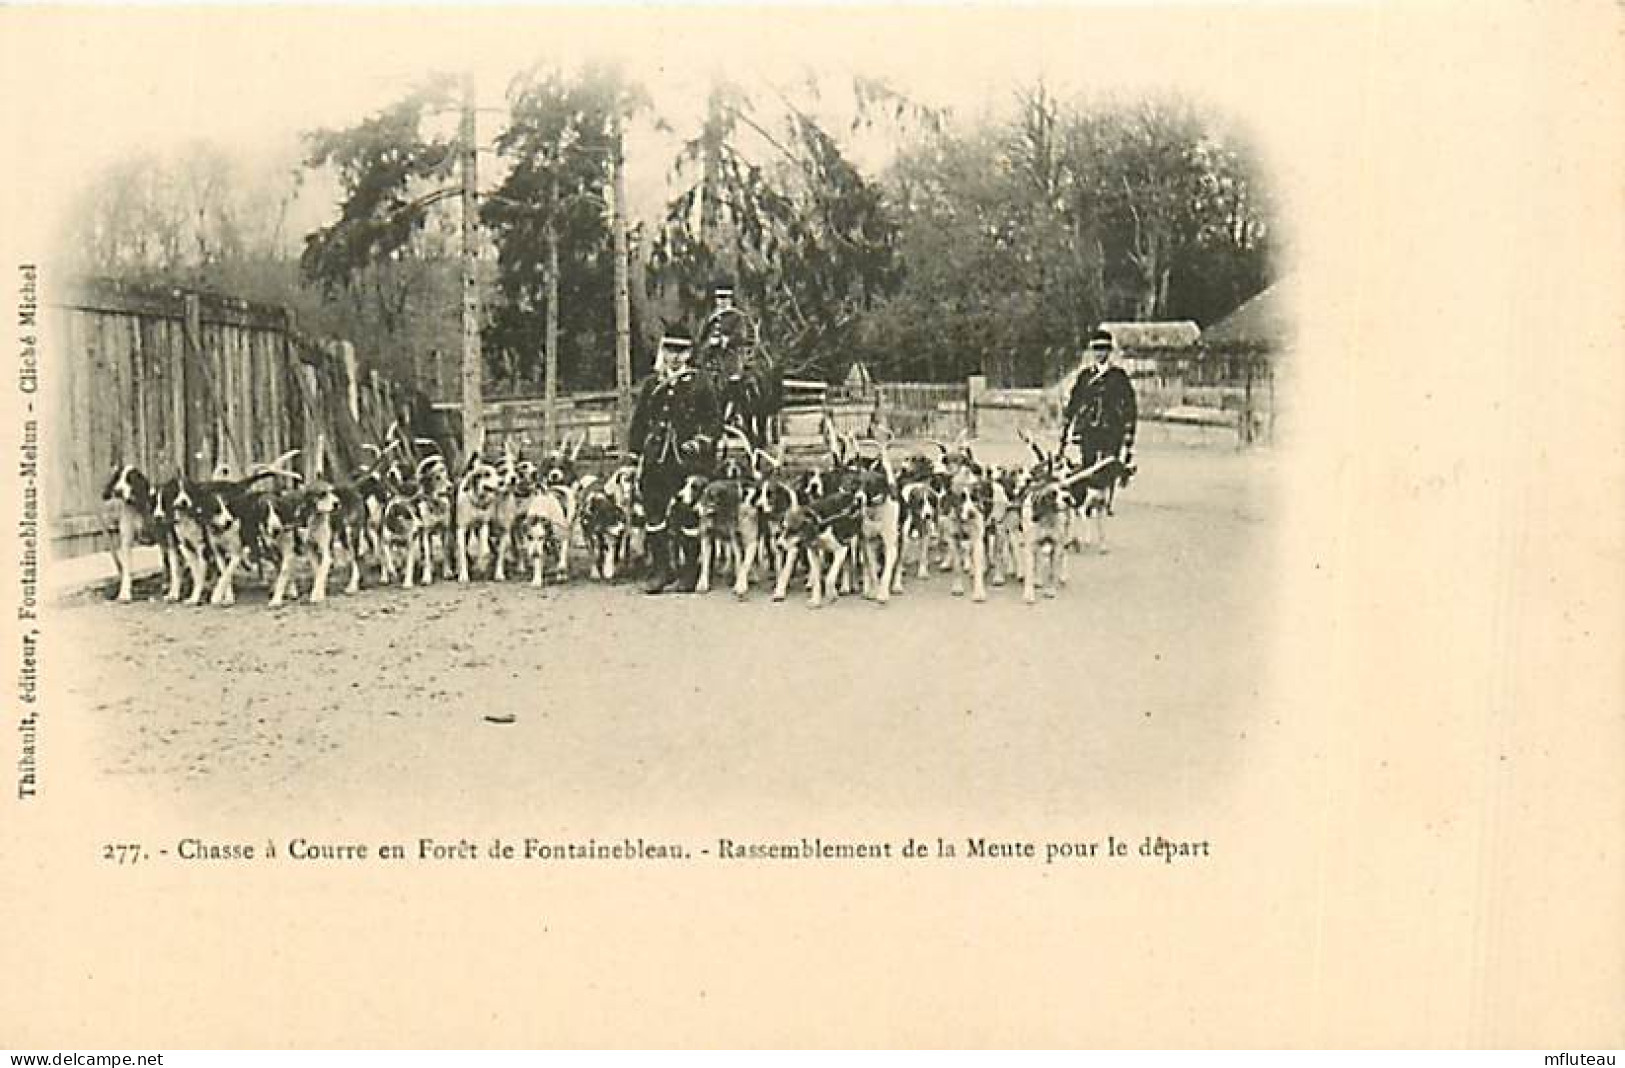 77* FONTAINEBLEAU Chasse A Courre  Rassemblement De La Meute  RL08.0154 - Chasse